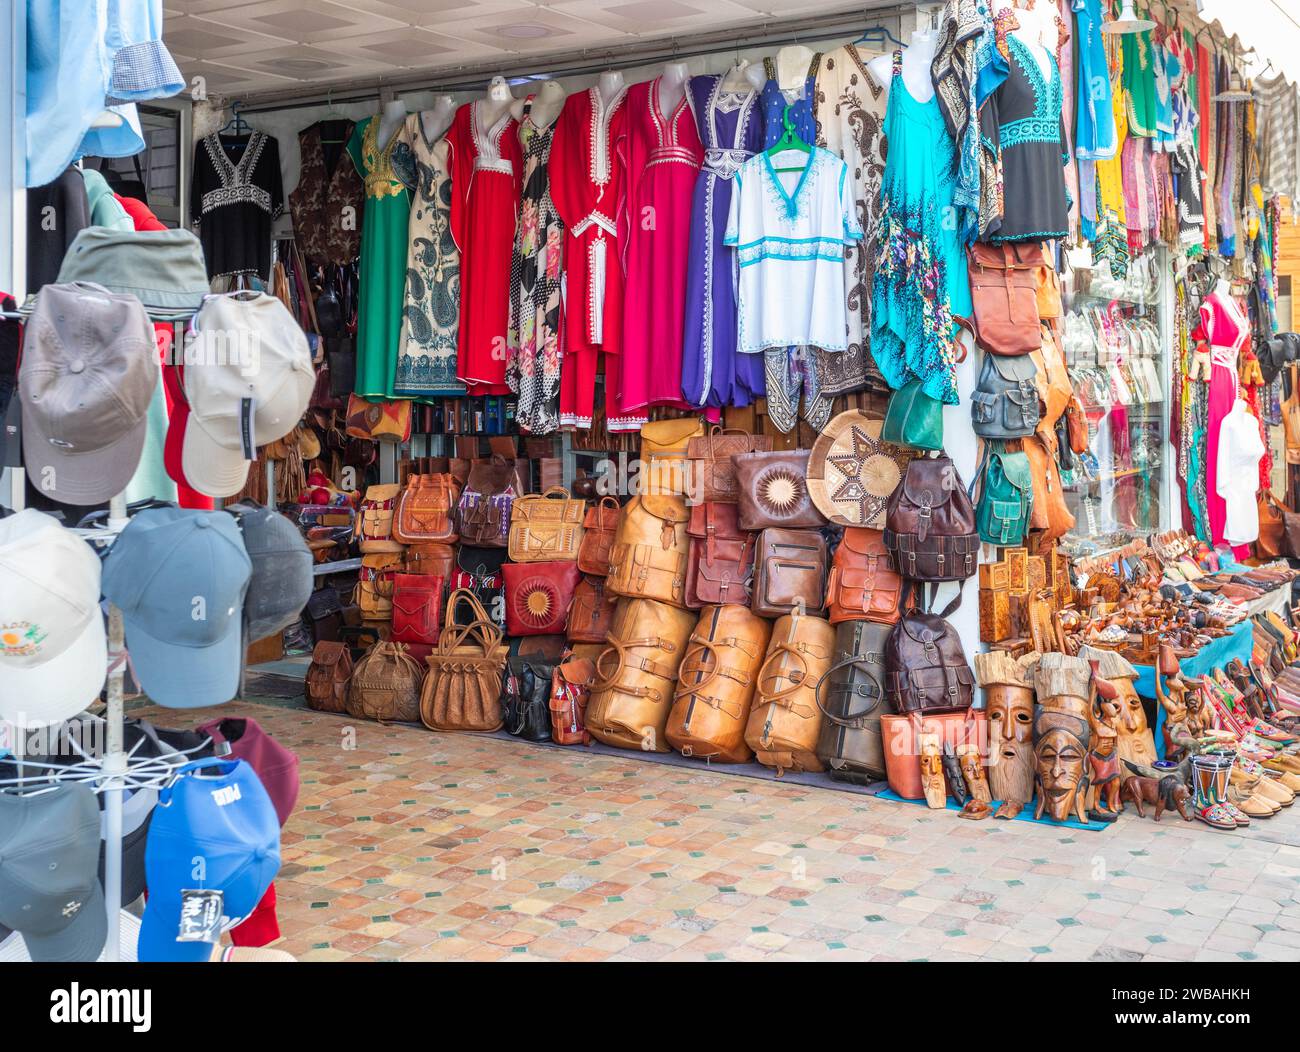 Typical souk store selling leather goods, clothing and souvenirs for tourists Stock Photo